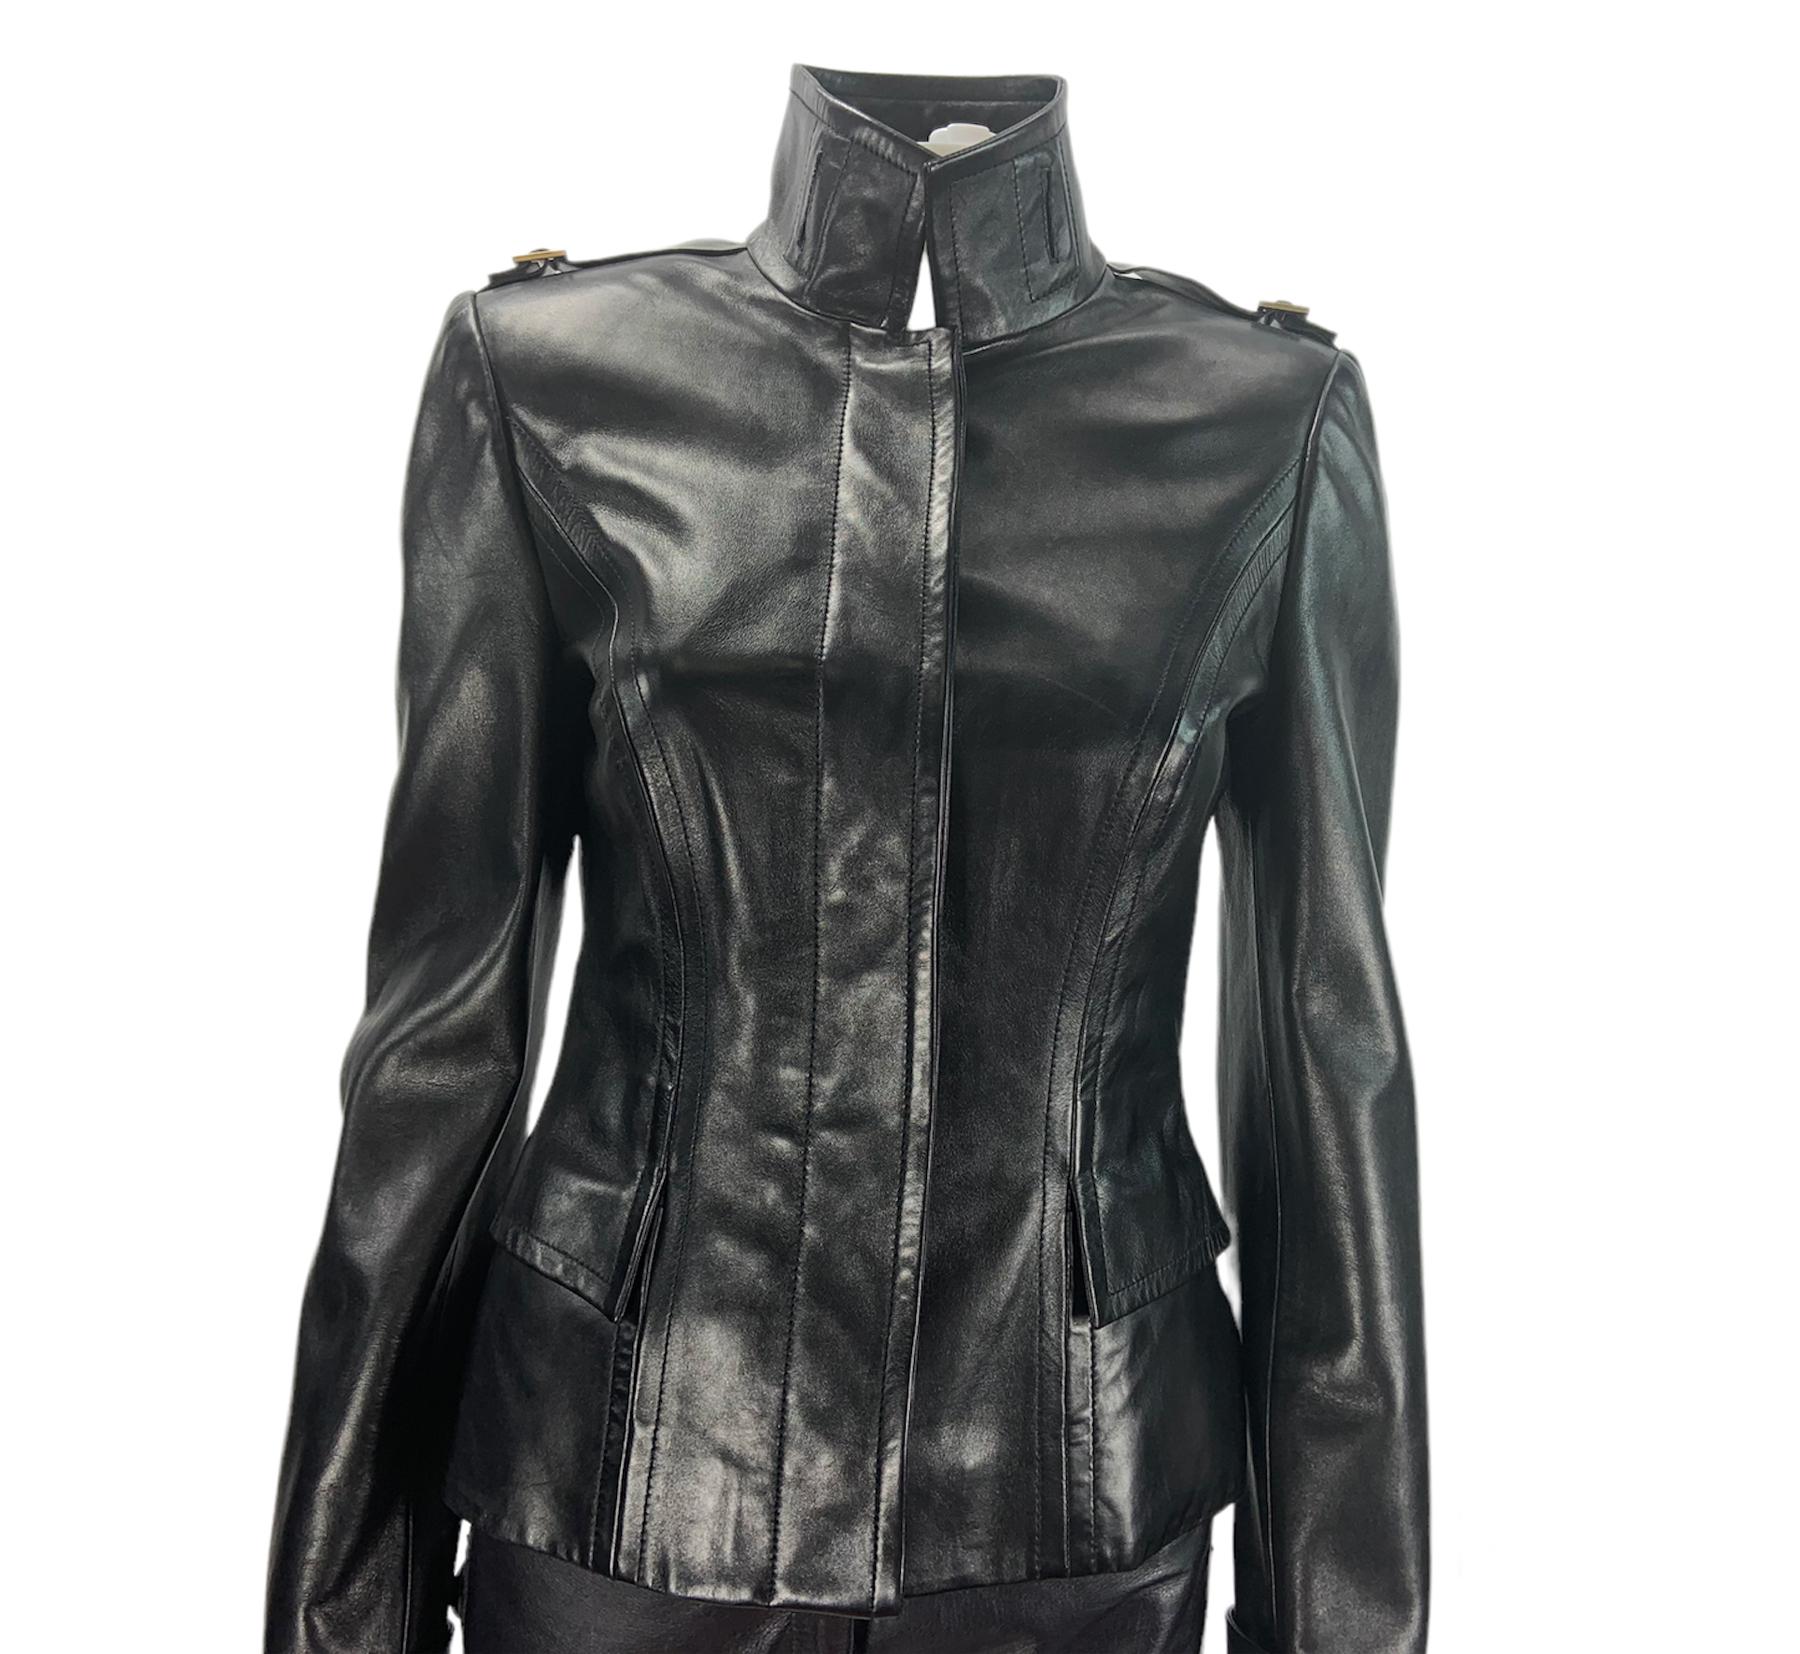 Vintage Tom Ford for Gucci Black Leather Women's Fitted Jacket
F/W 2001 Collection
Italian size - 40
100% Genuine Leather, Hidden Button Closure, Epaulets with Gold Tone Buckles, Two Deep Side Pockets, Fully Lined.
Measurements: Length - 22.5